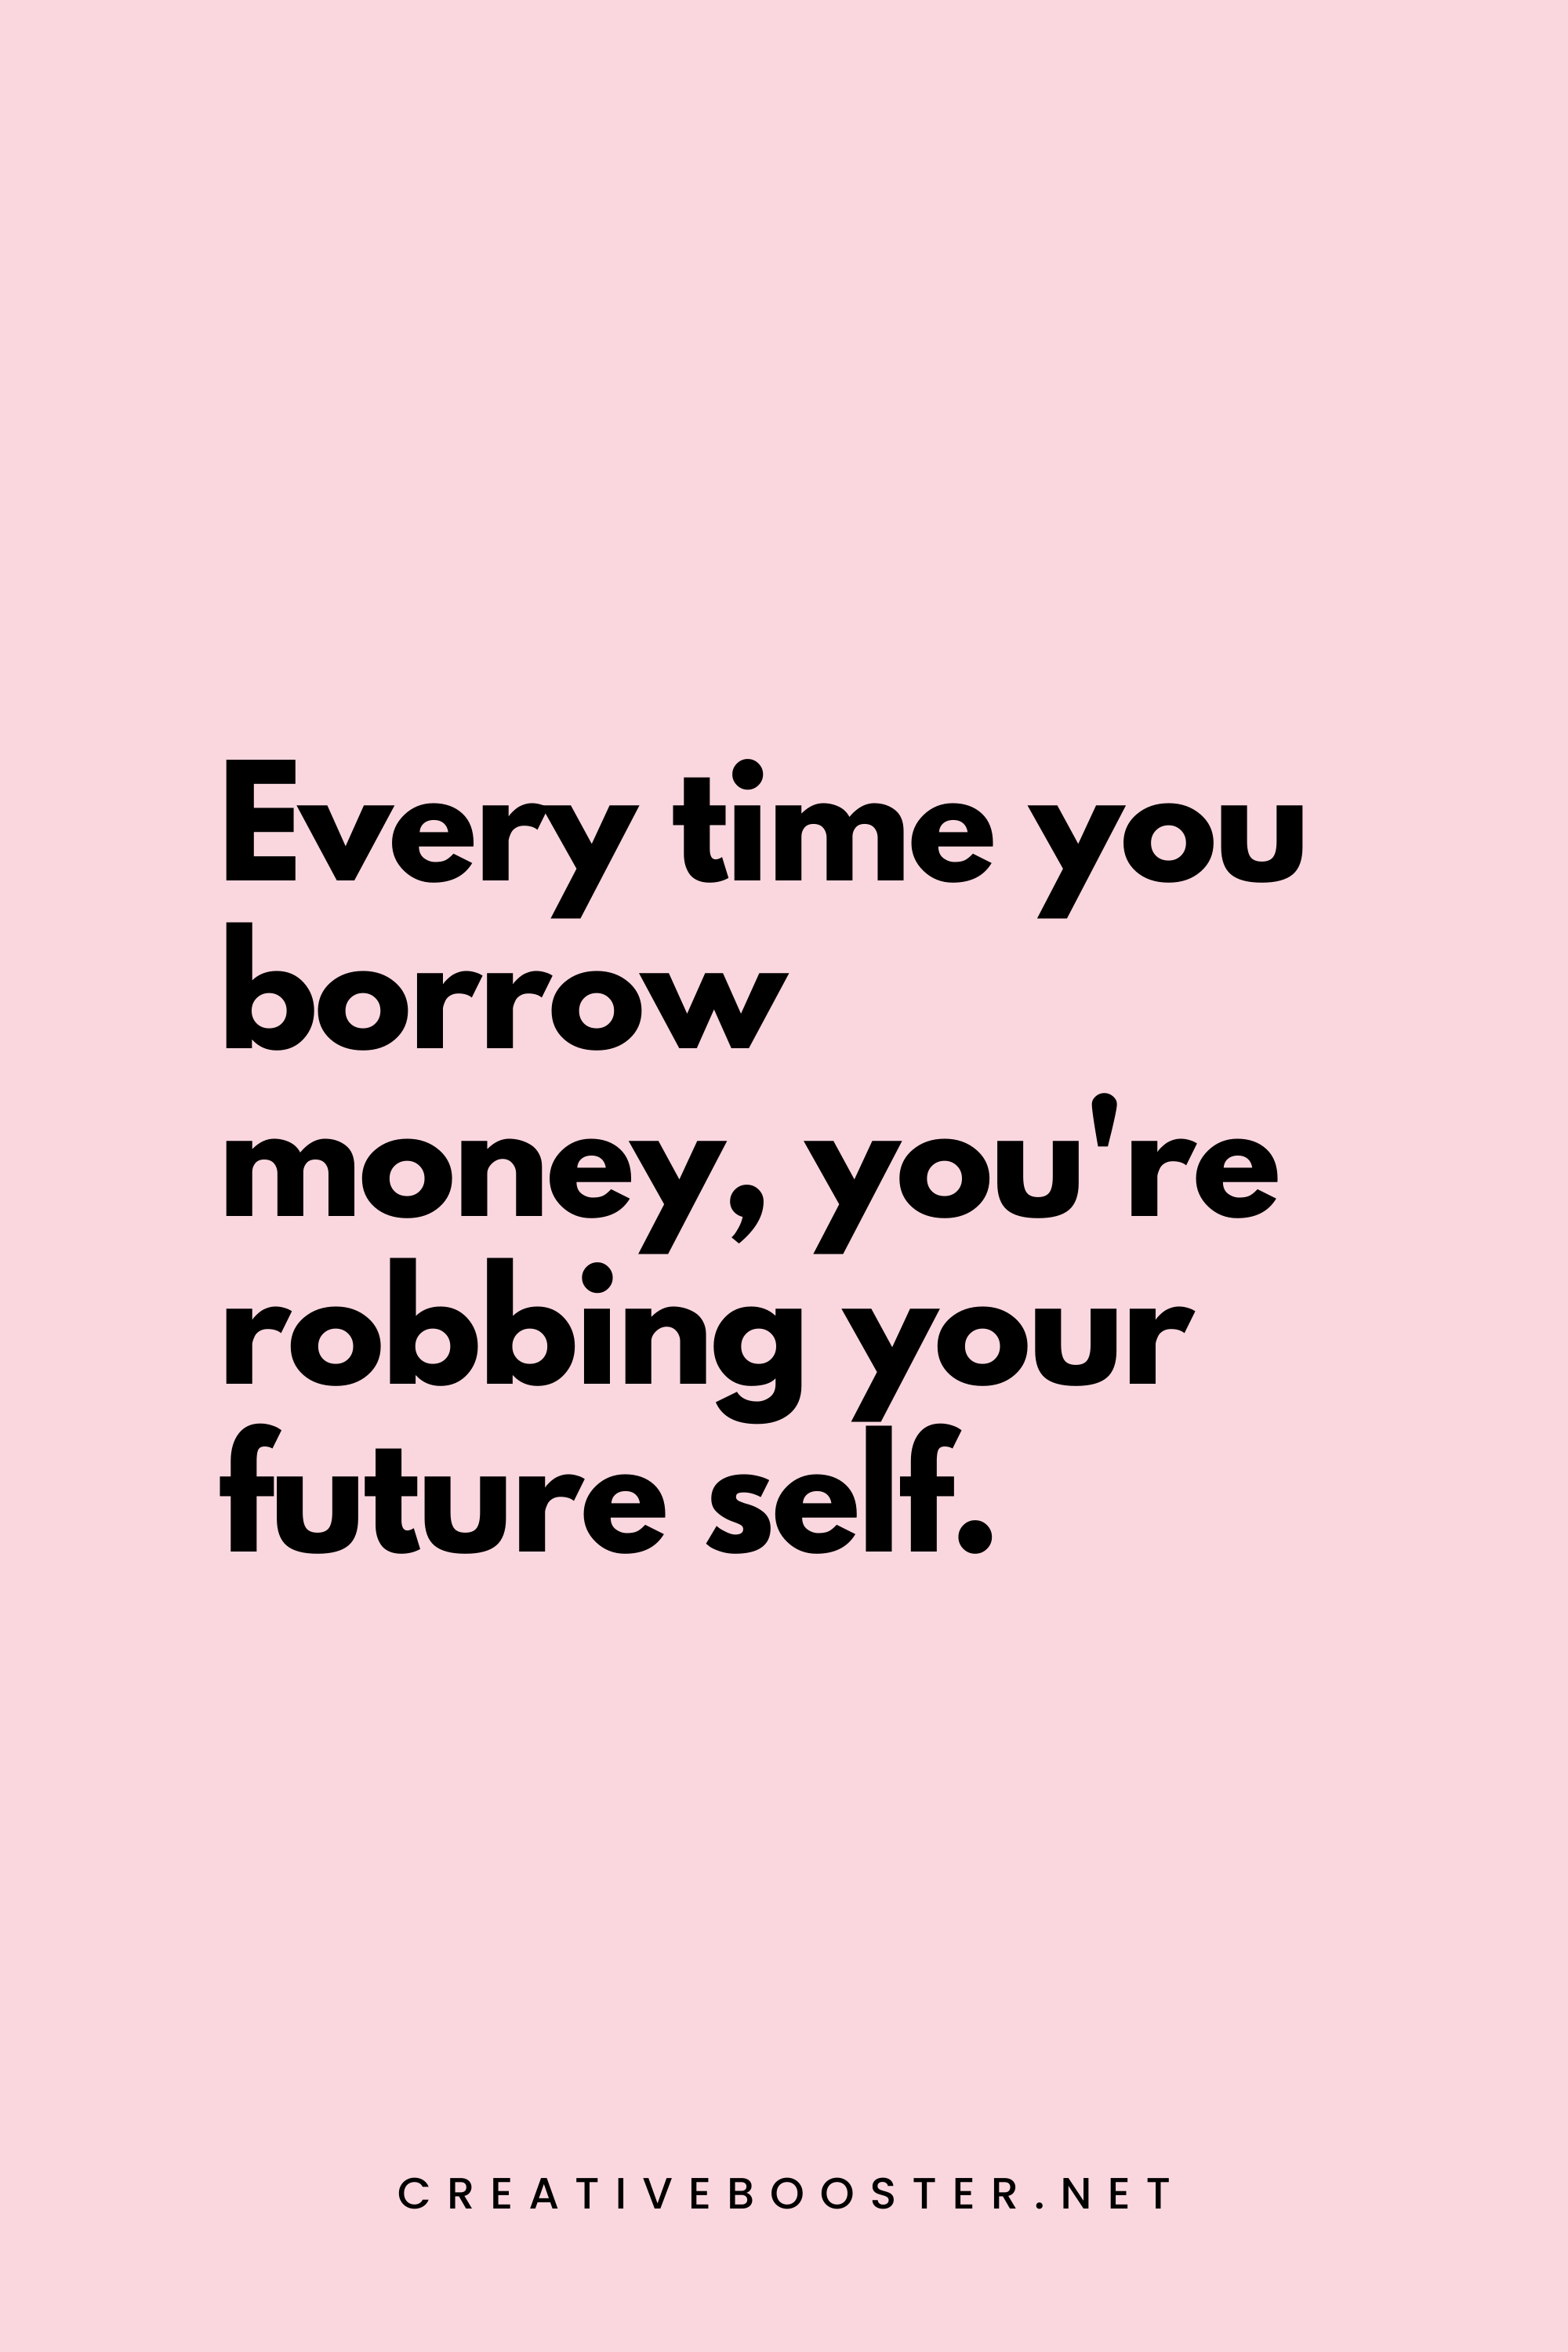 9. Every time you borrow money, you're robbing your future self. - Nathan W. Morris - 1. Popular Financial Freedom Quotes